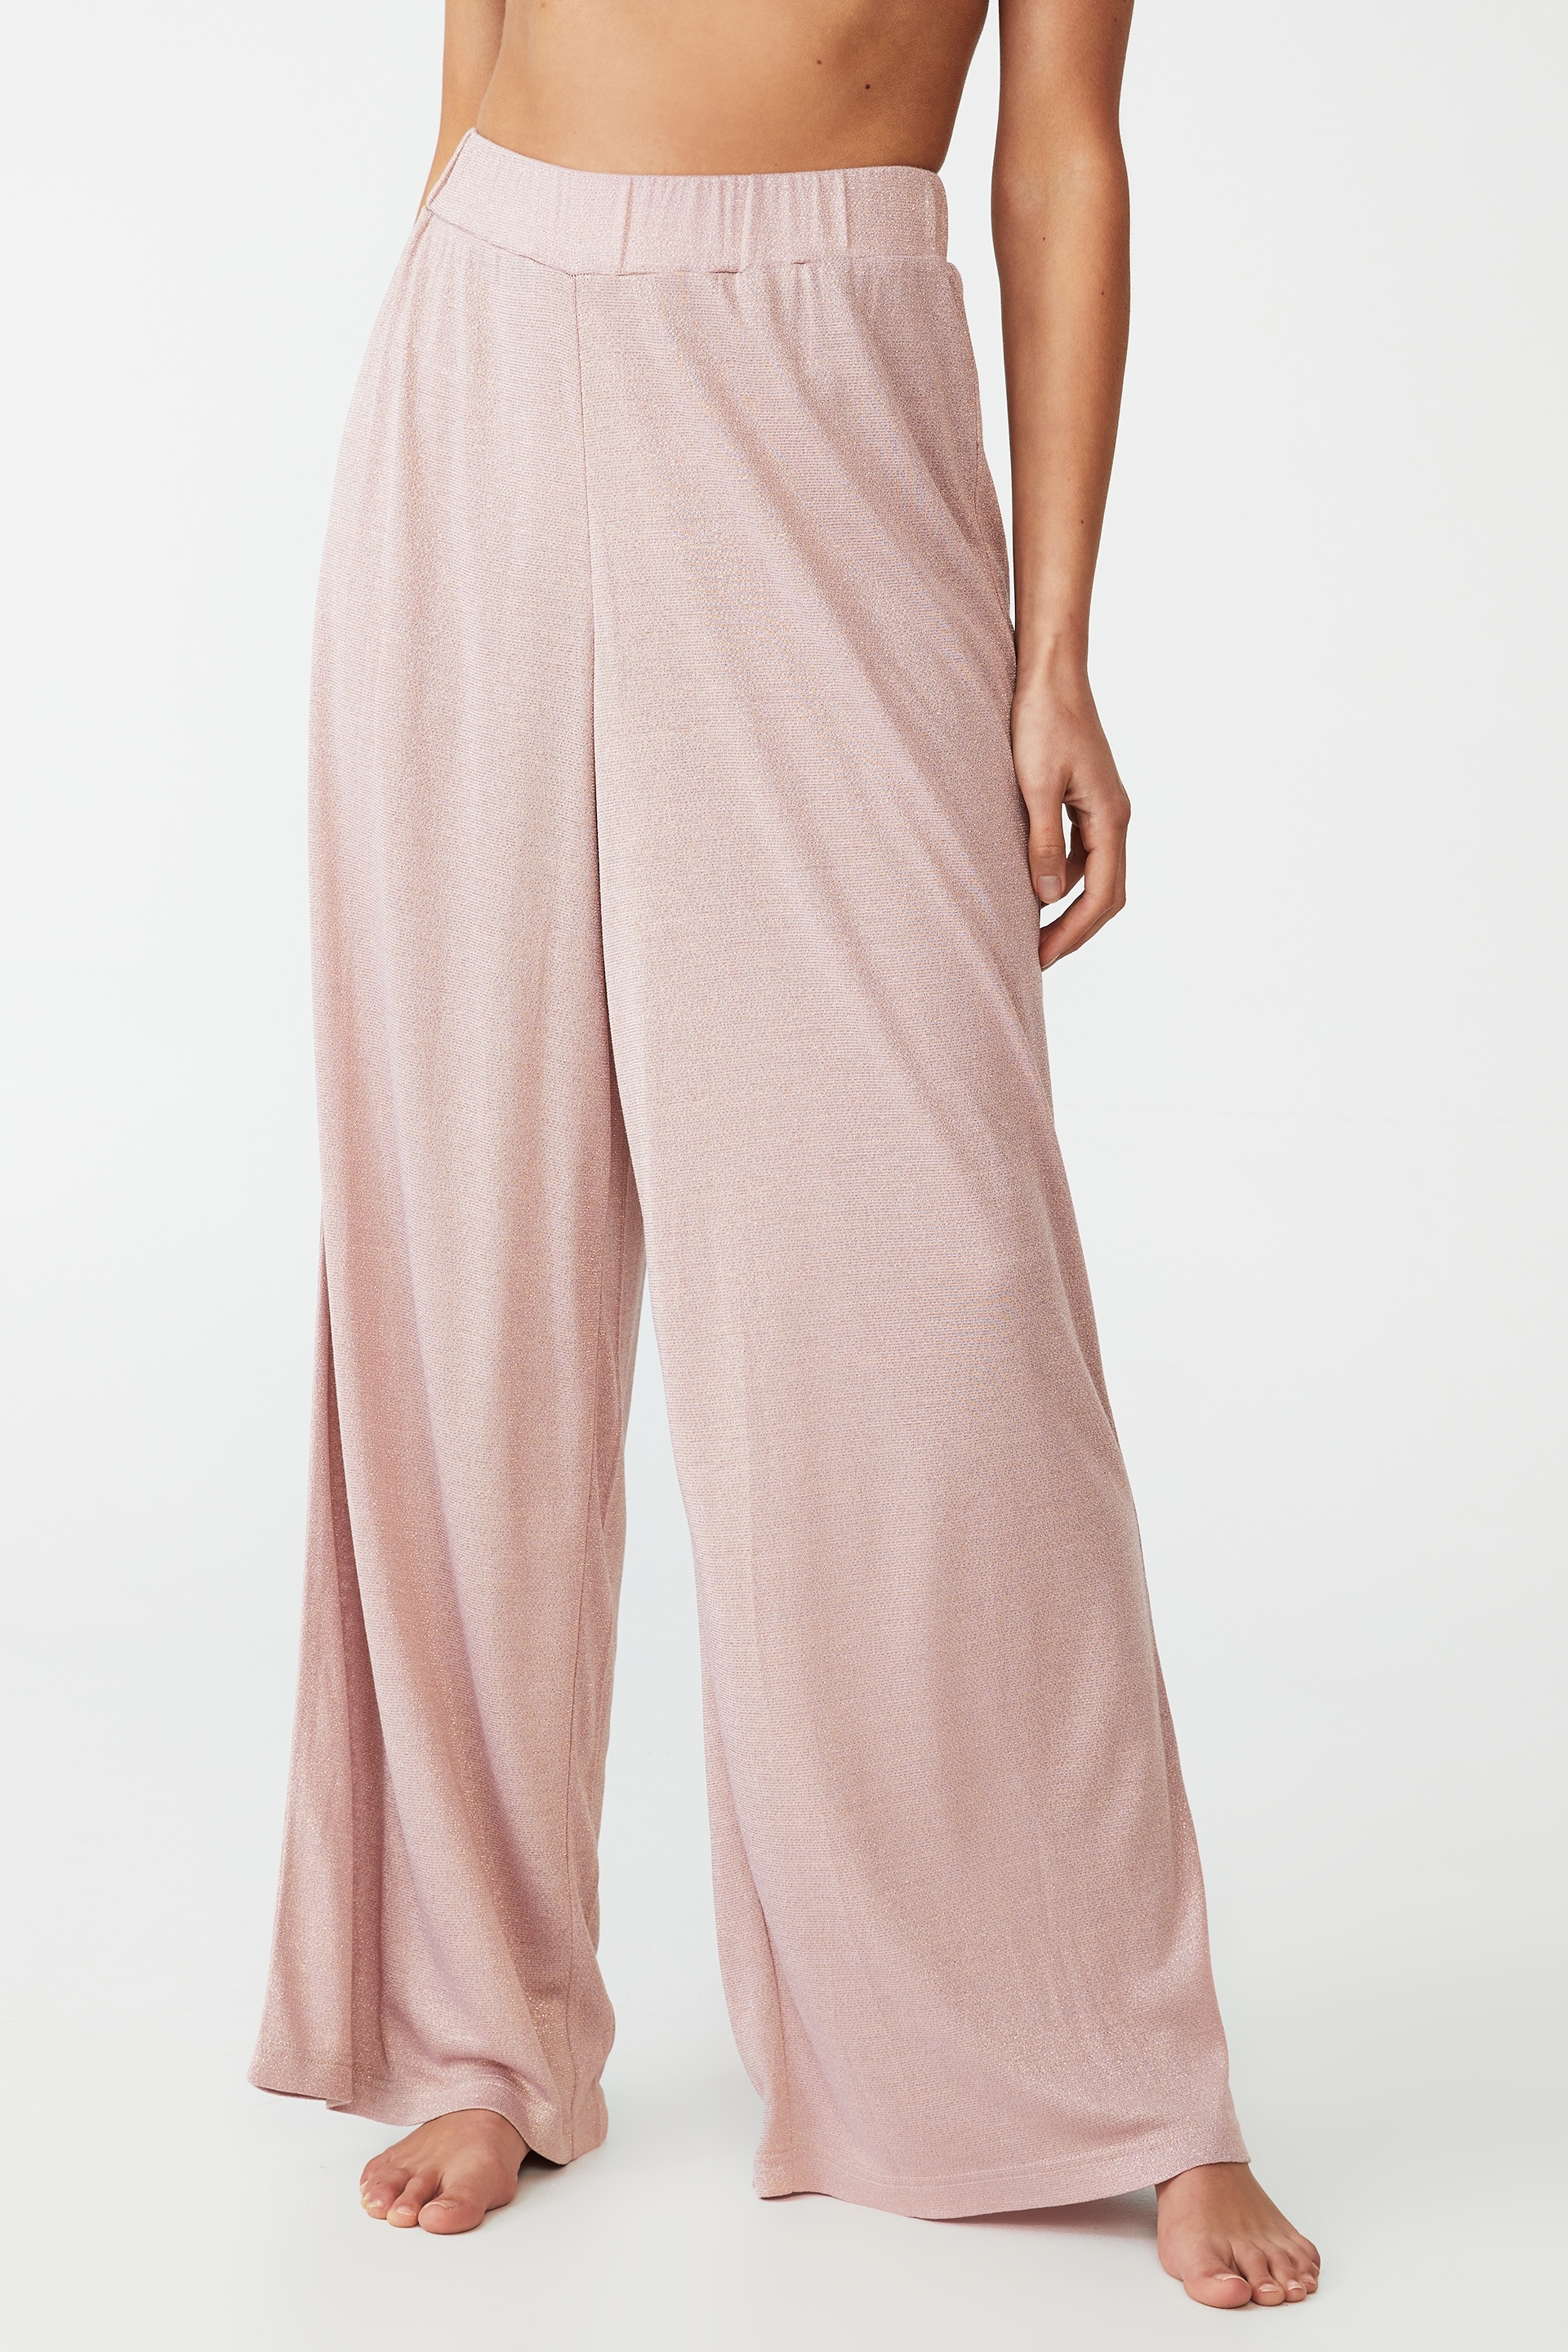 Body - Relaxed Beach Pant - Lilac blossom lurex shimmer